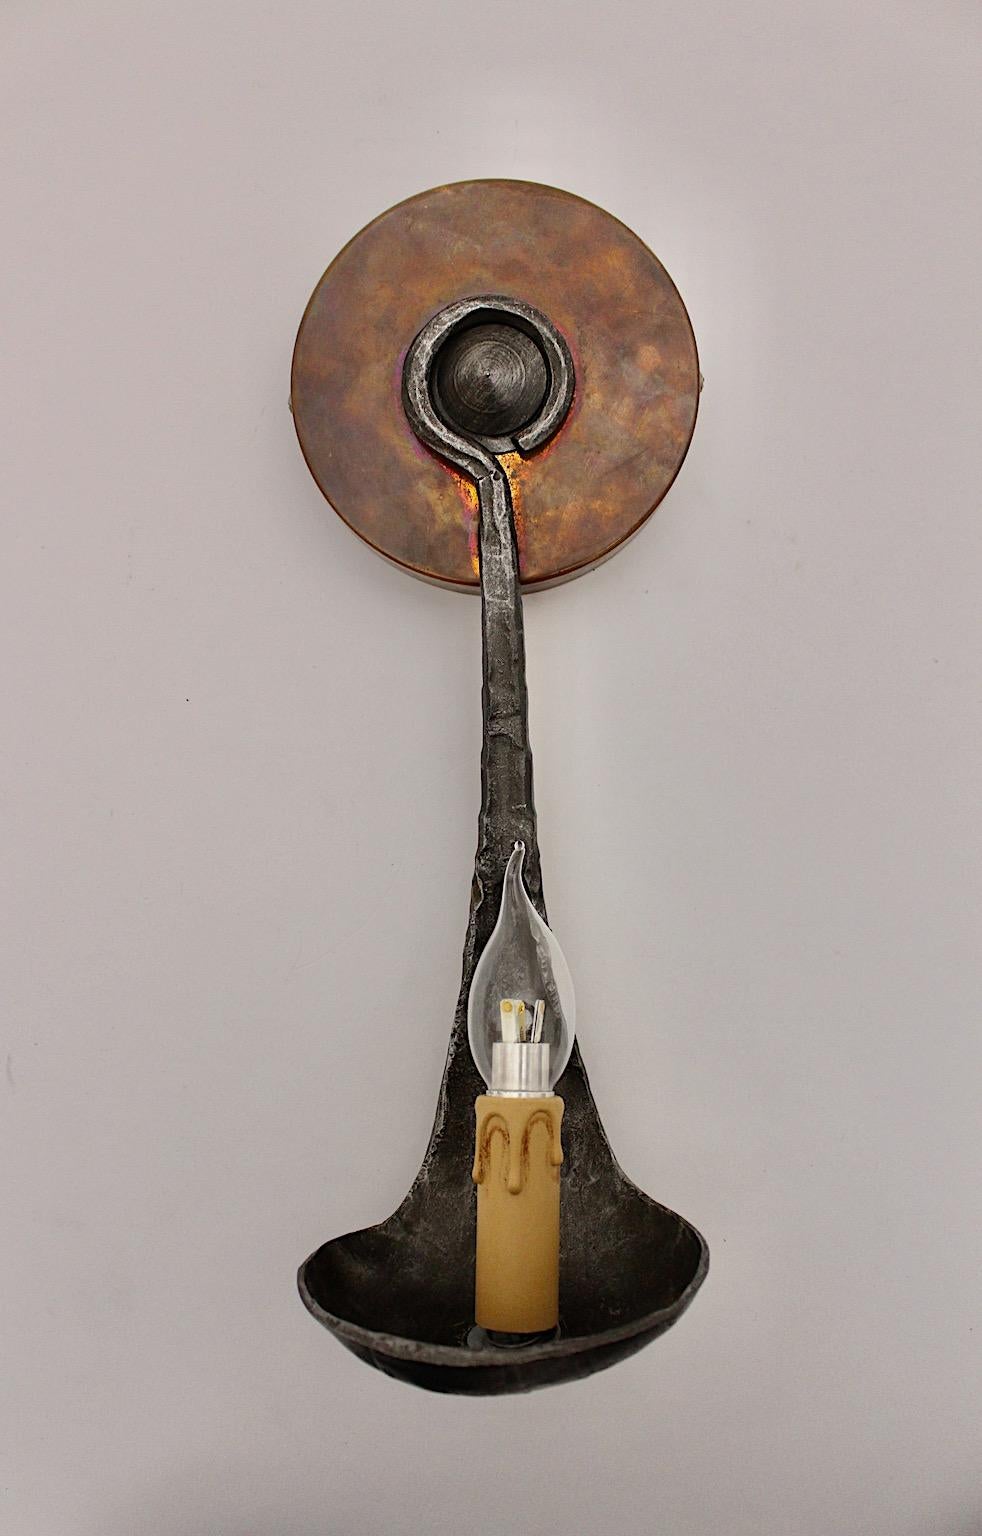 Modernist brutalist vintage sconce or wall light by Banci Firenze circa 1980 Italy.
This gorgeous sconce or wall light features two toned metal design, hand forged parts with a circular base of copper with one E 27 socket as candleholder.
The